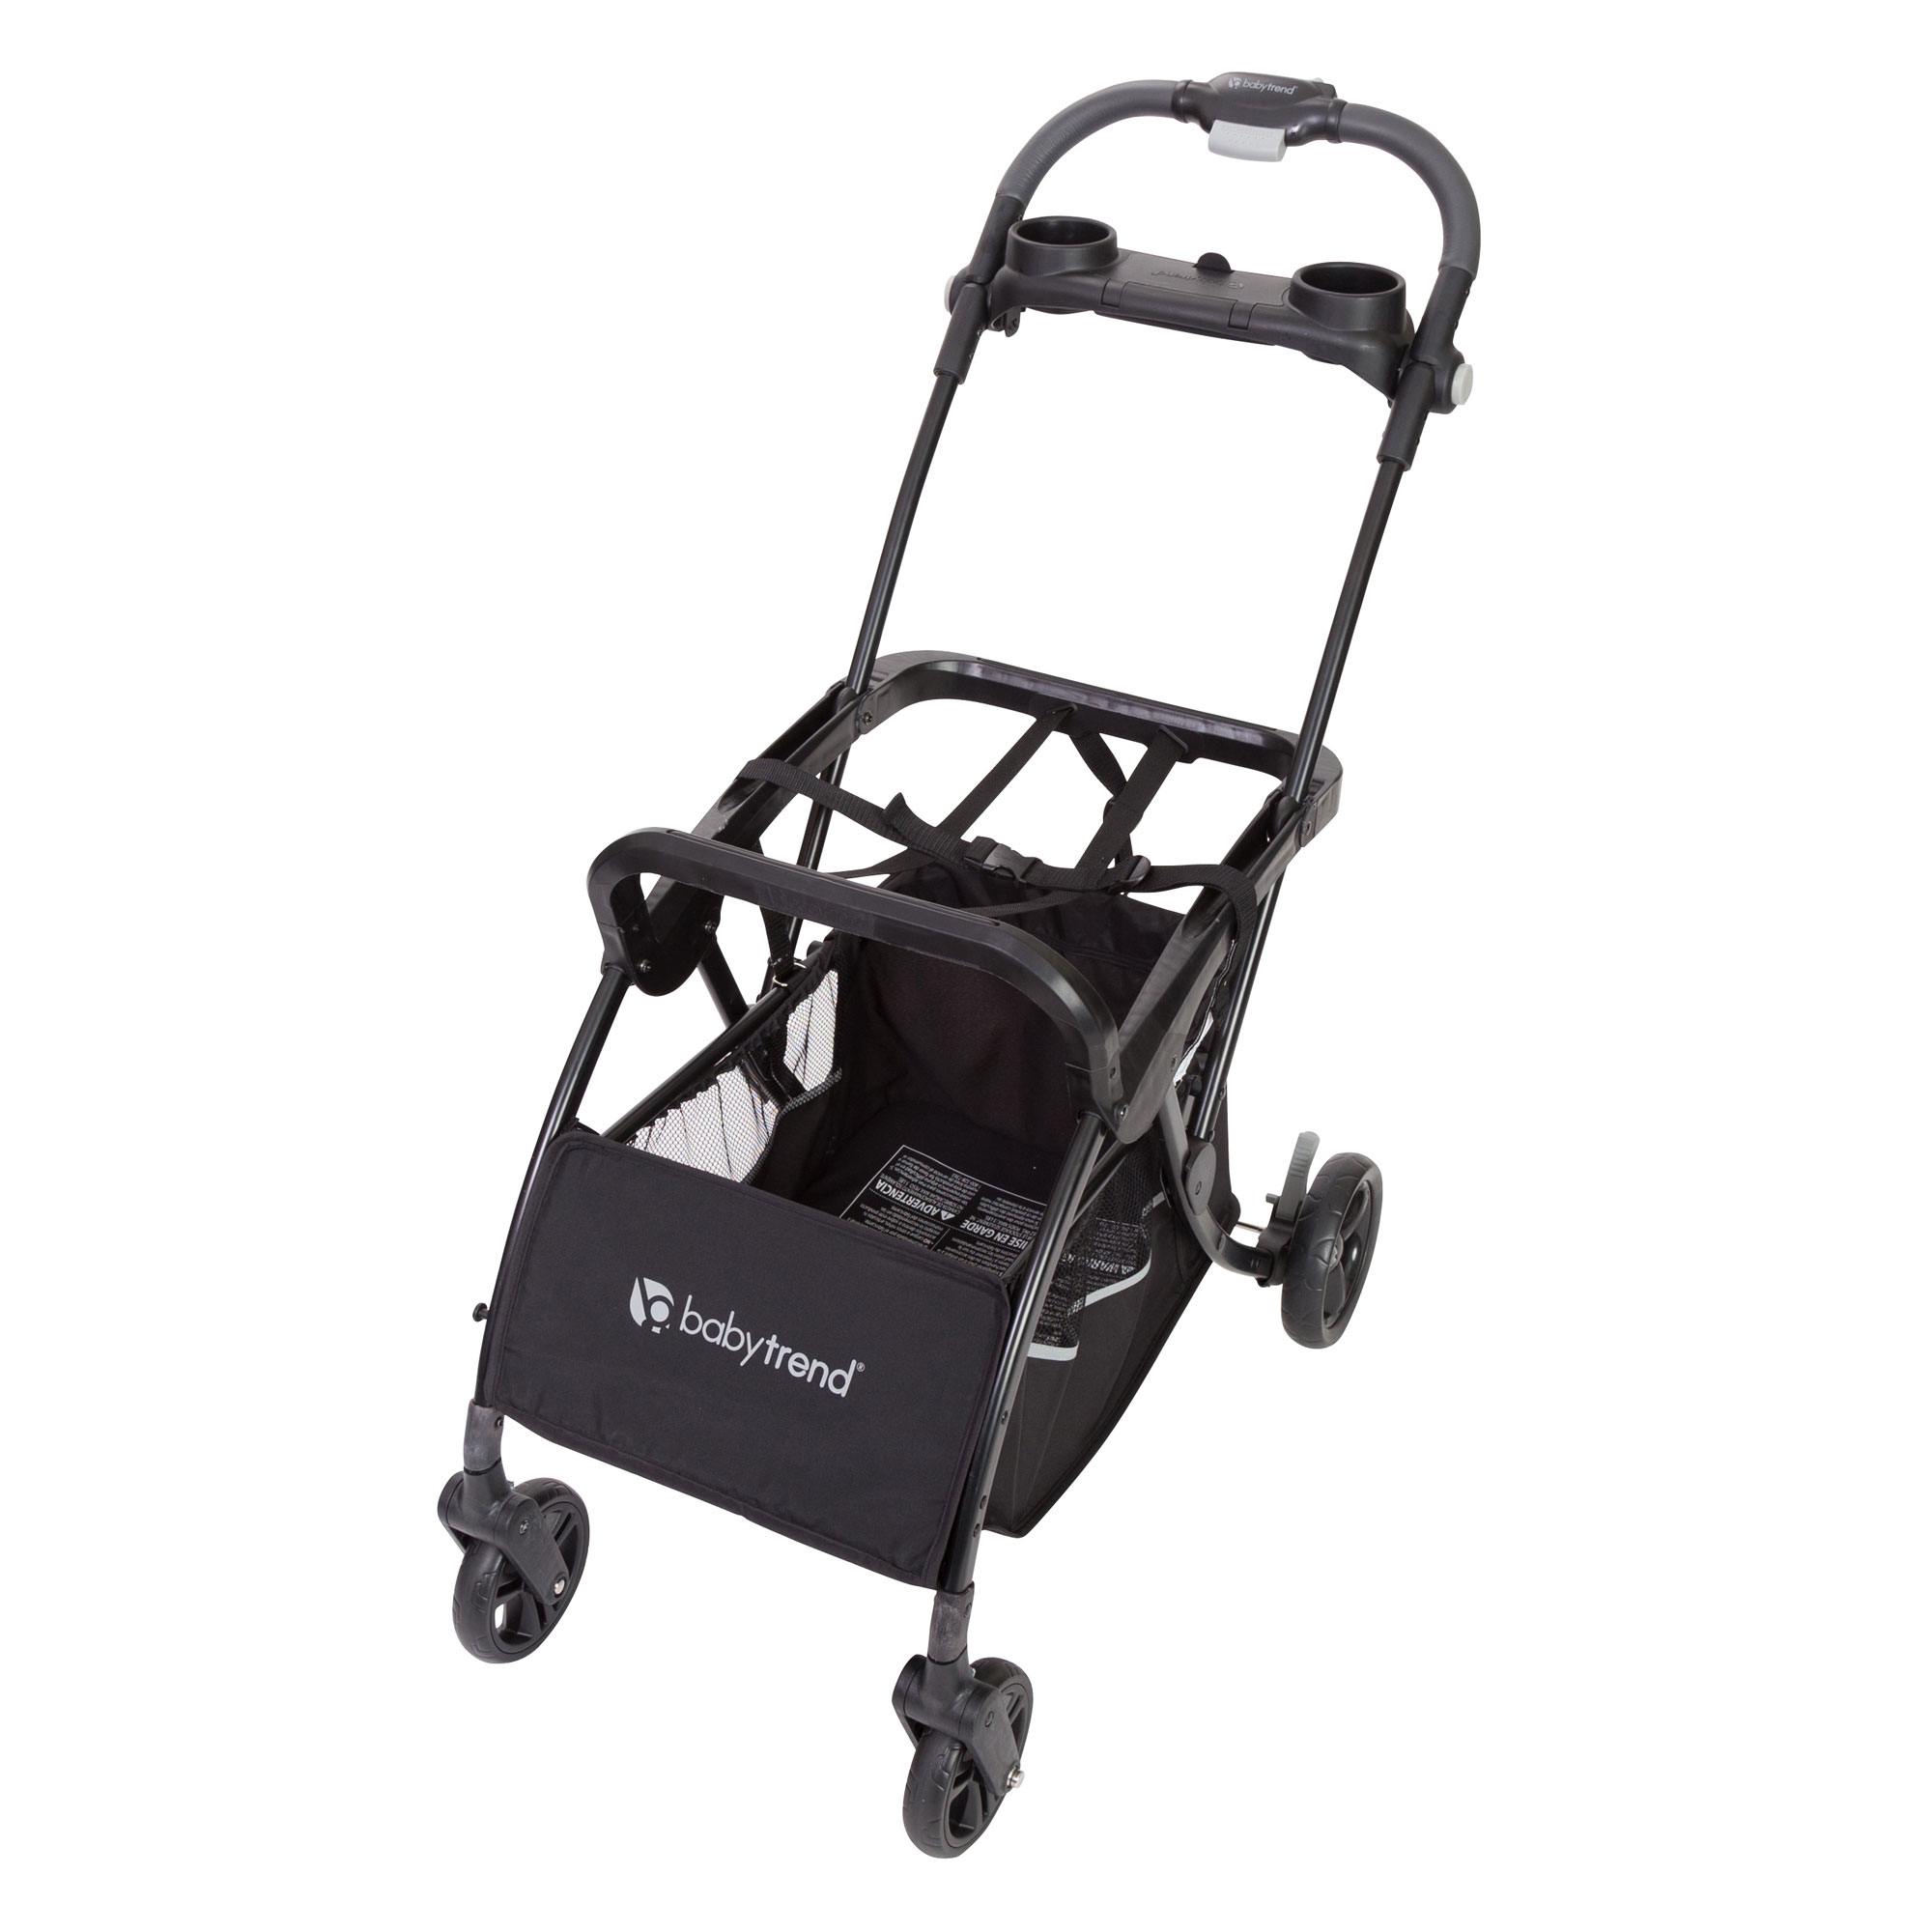 graco snap n go stroller compatibility